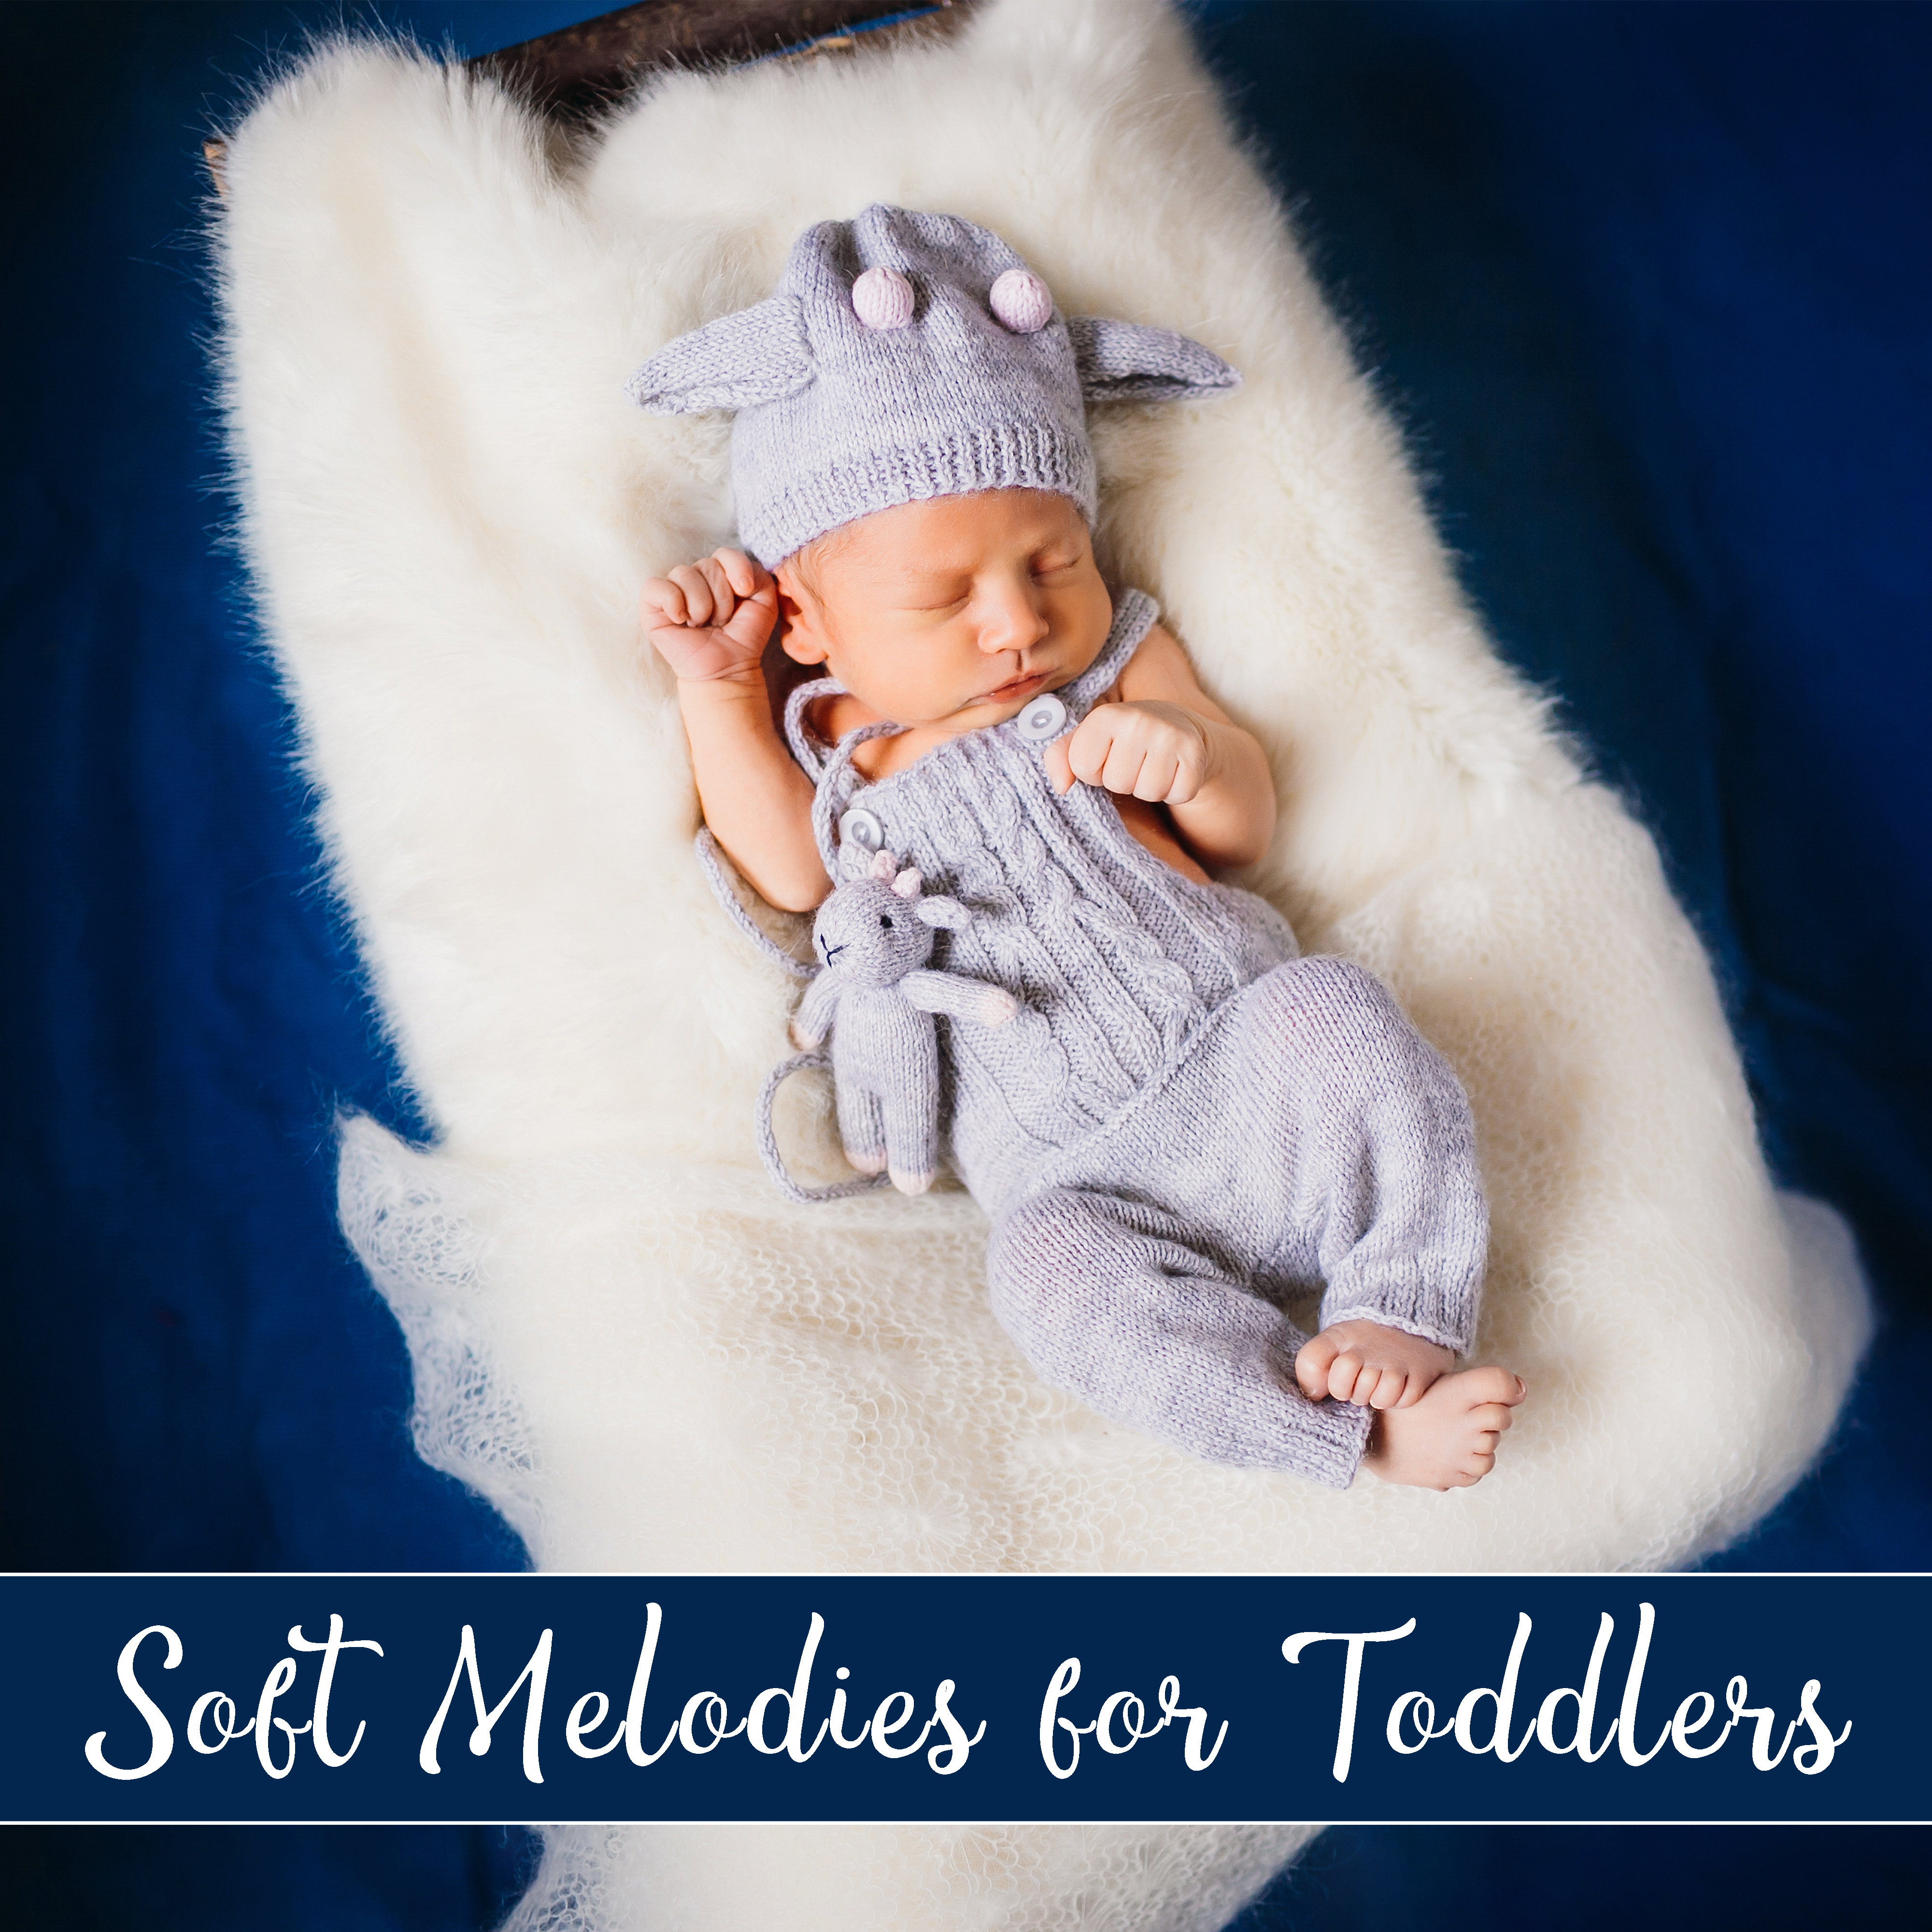 Soft Melodies for Toddlers